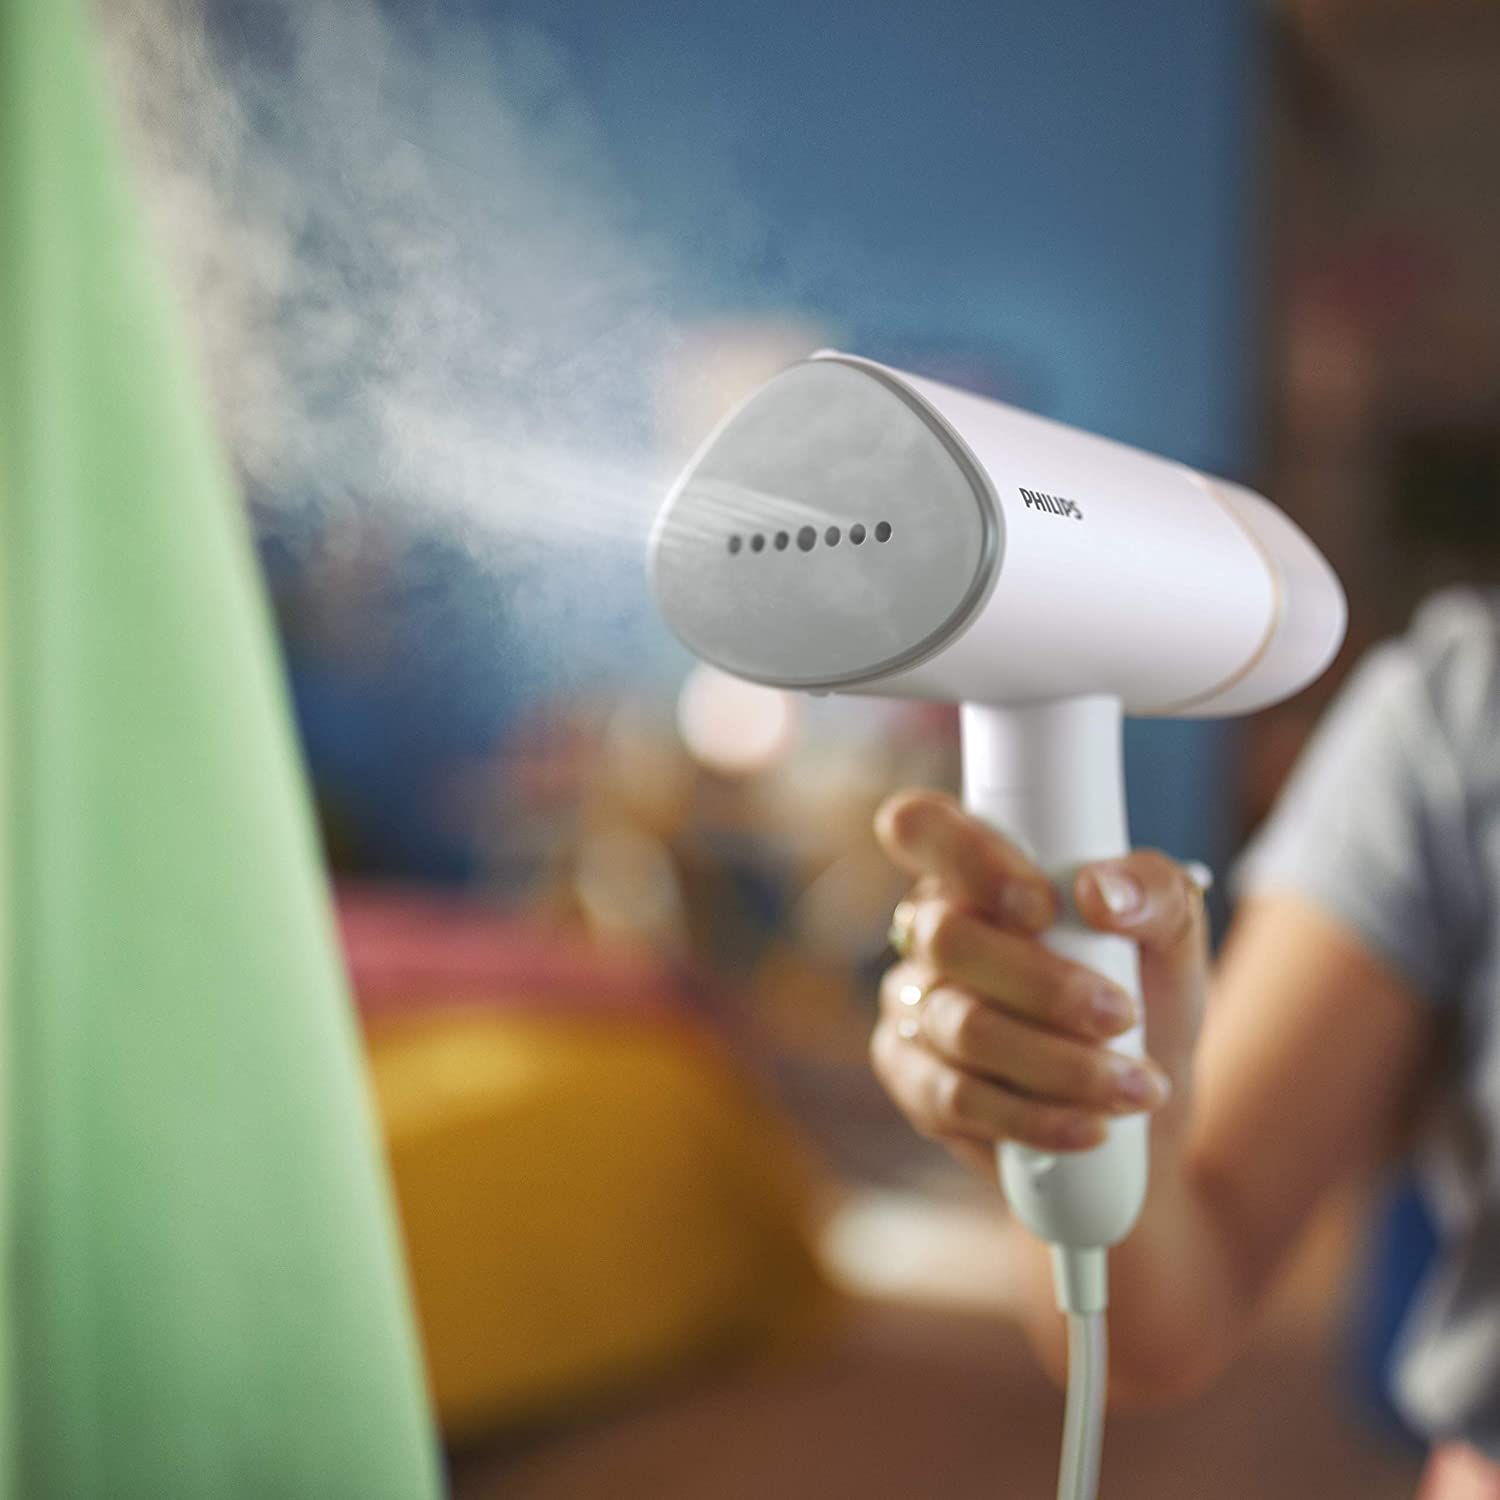 Philips Handheld Steamer 3000 Series review: The handheld garment steamer  is budget-friendly and portable